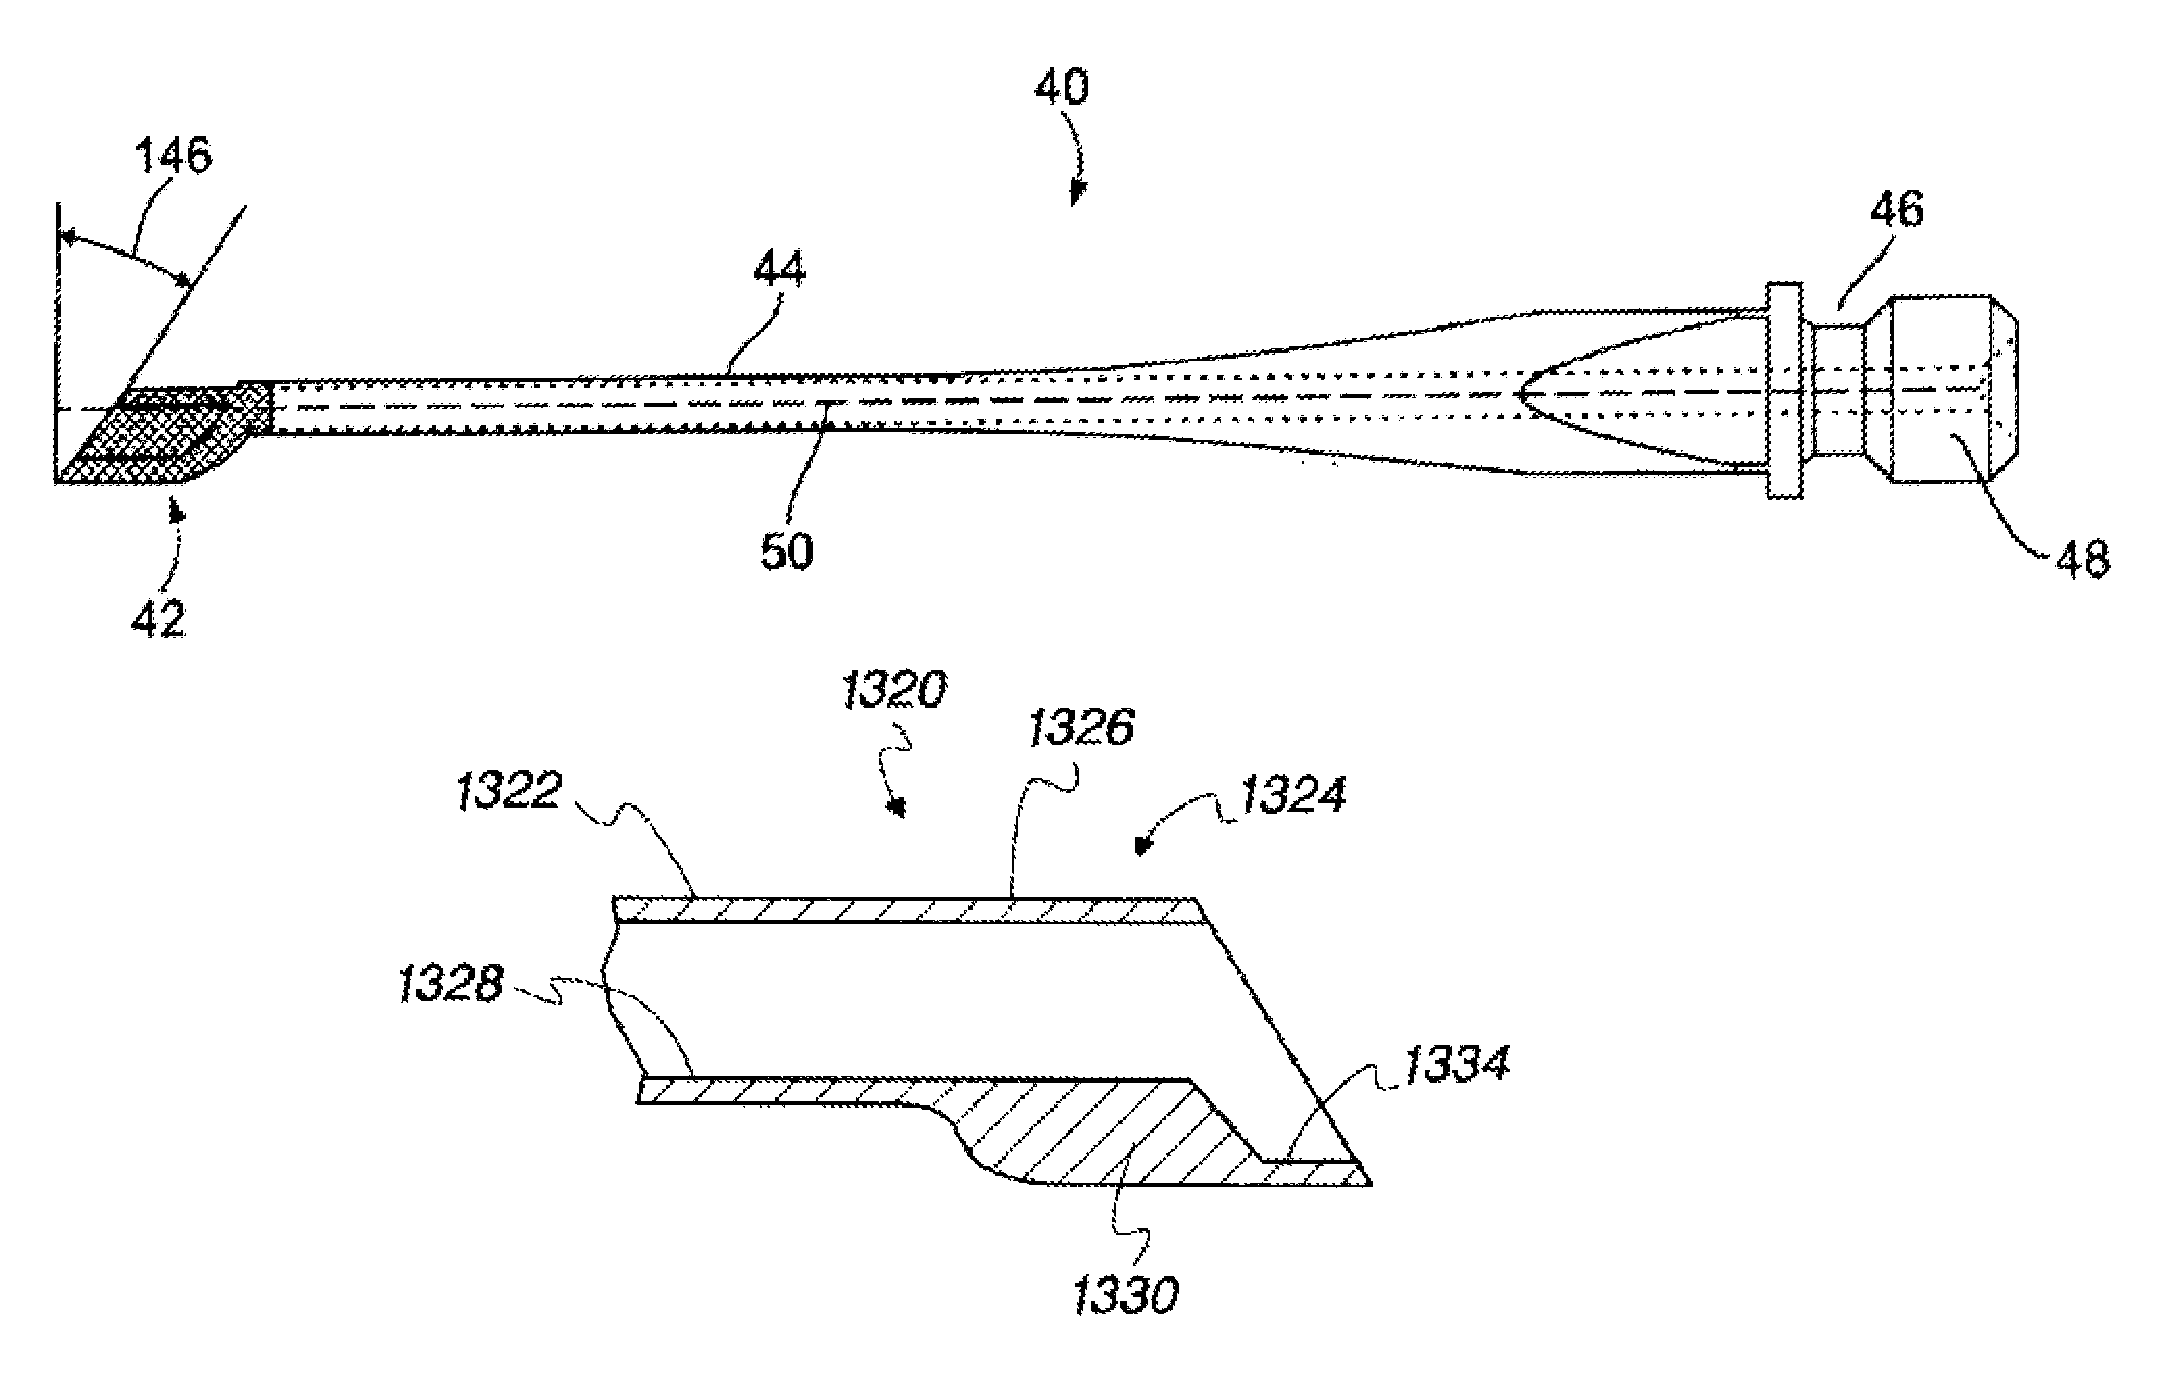 Apparatus and method for phacoemulsification